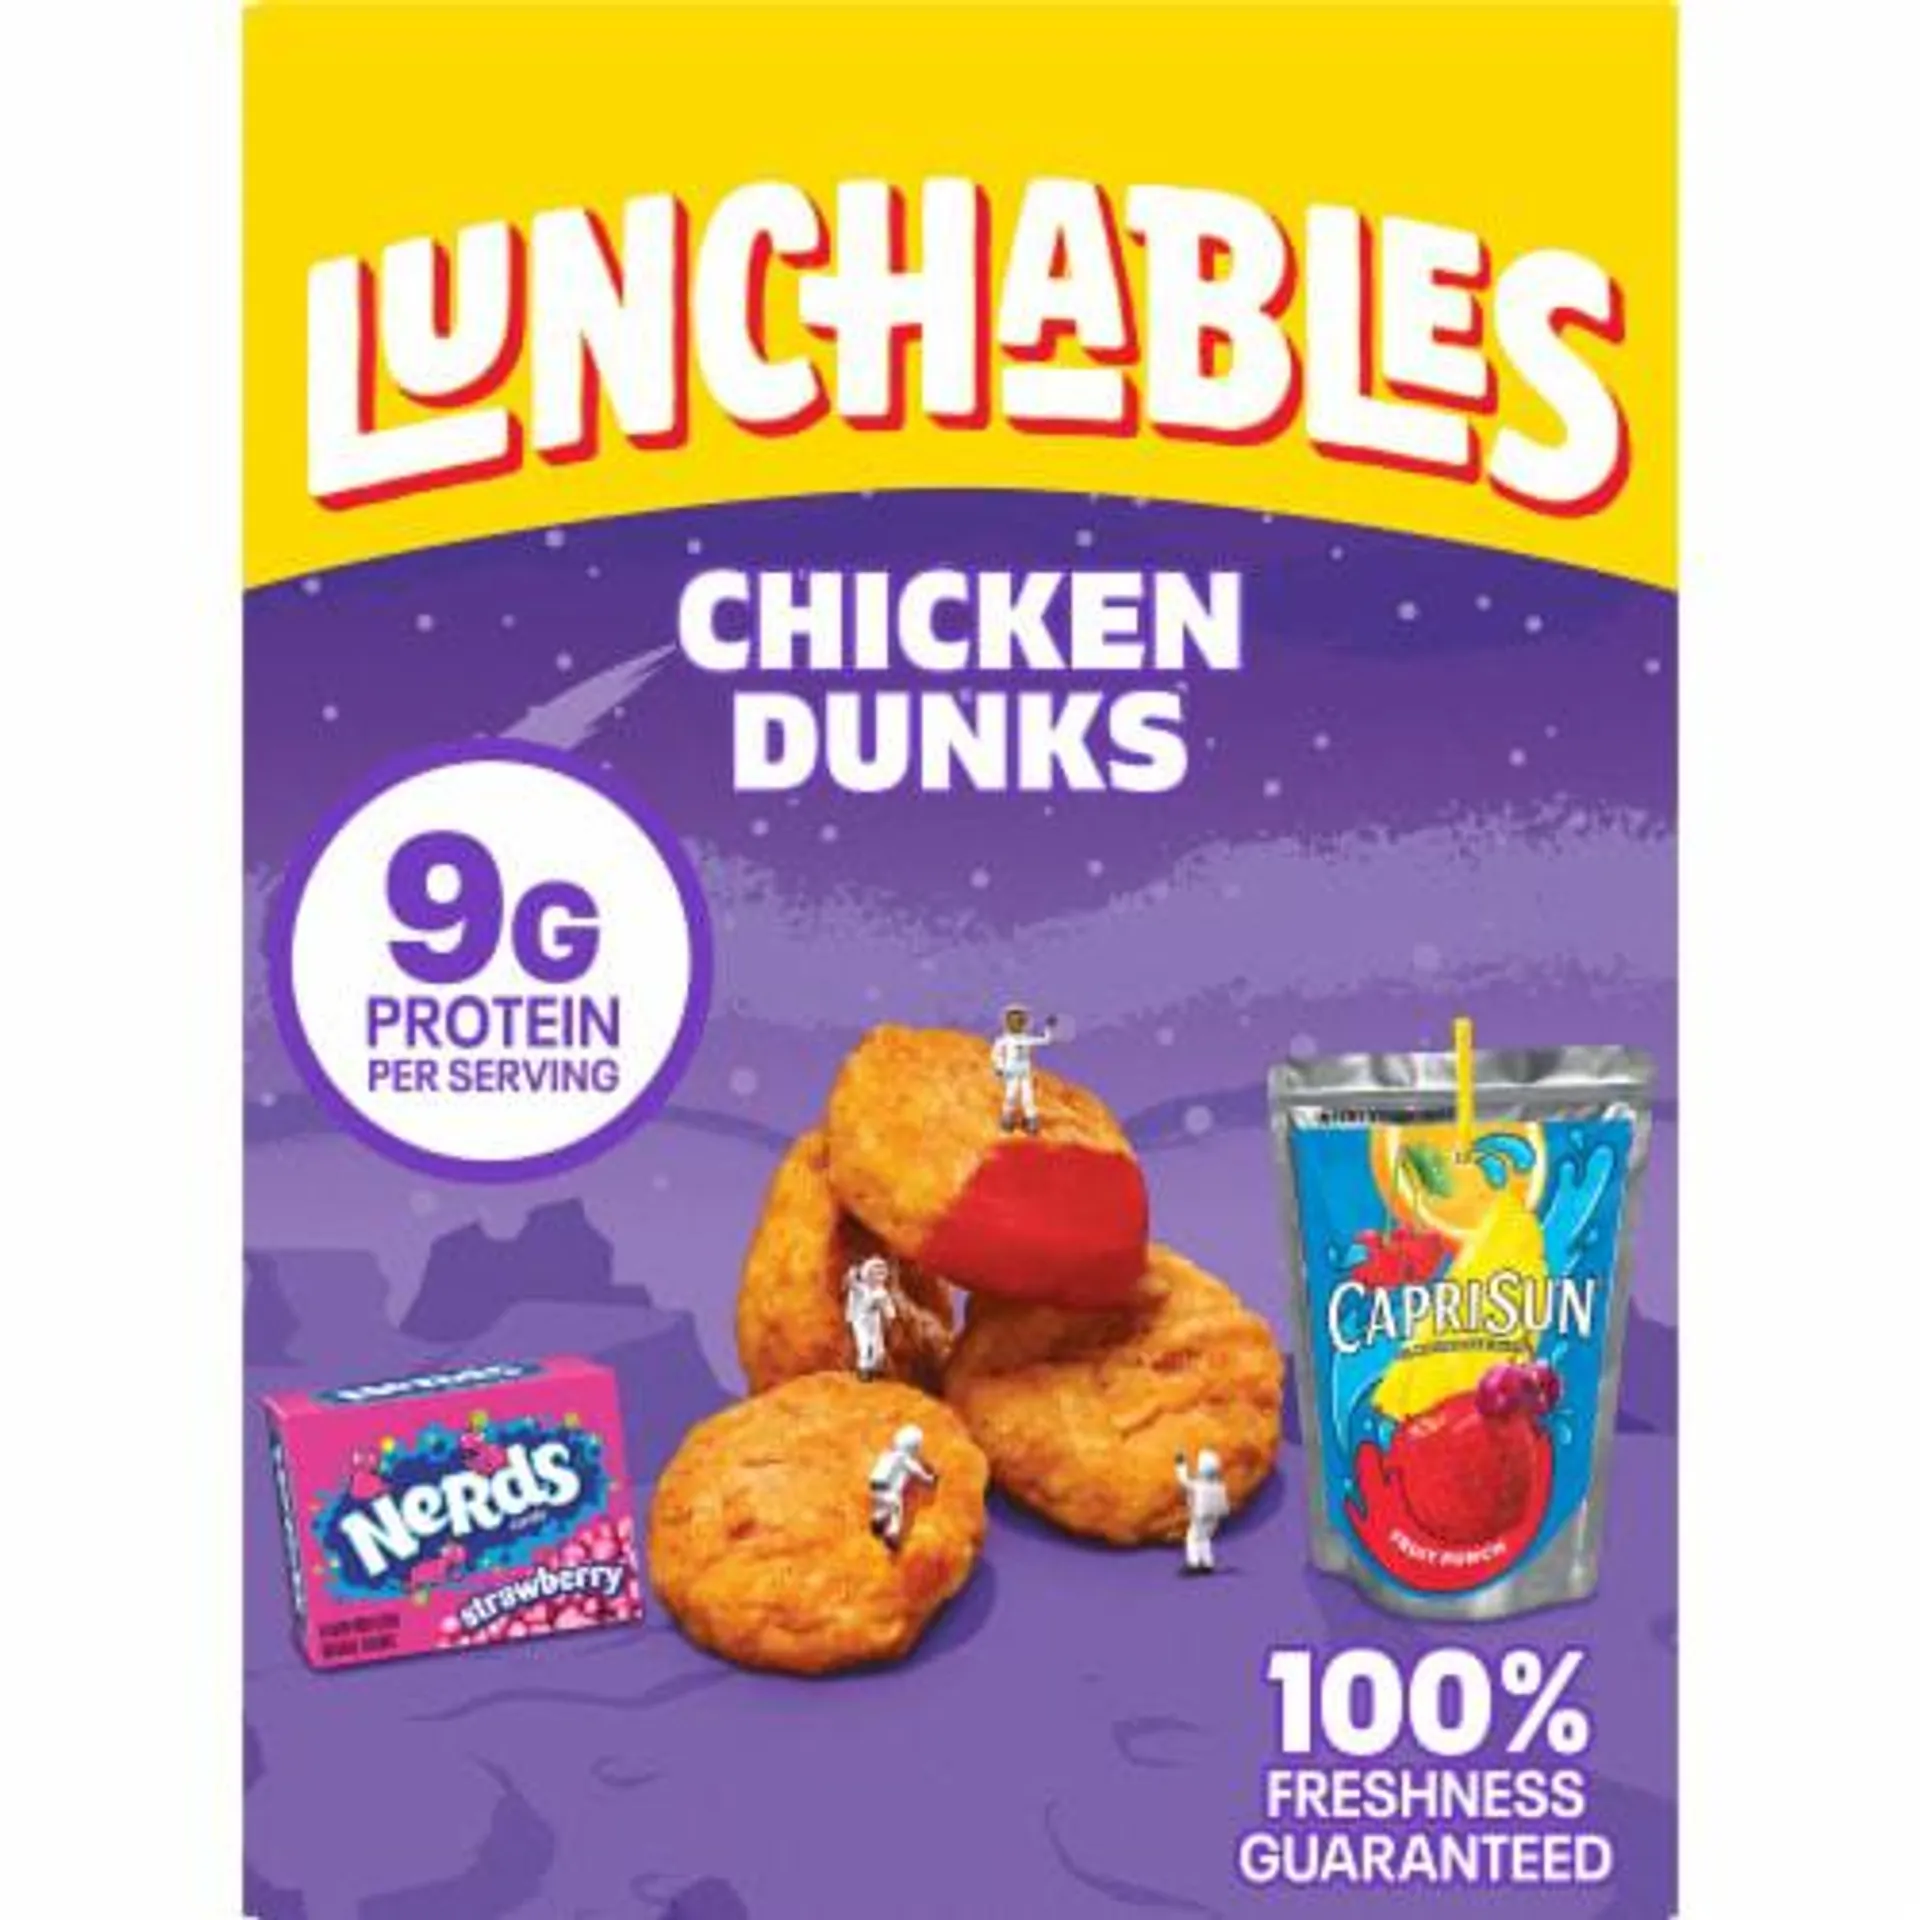 Lunchables Chicken Dunks with Capri Sun Drink & Nerds Candy Kids Lunch Meal Kit